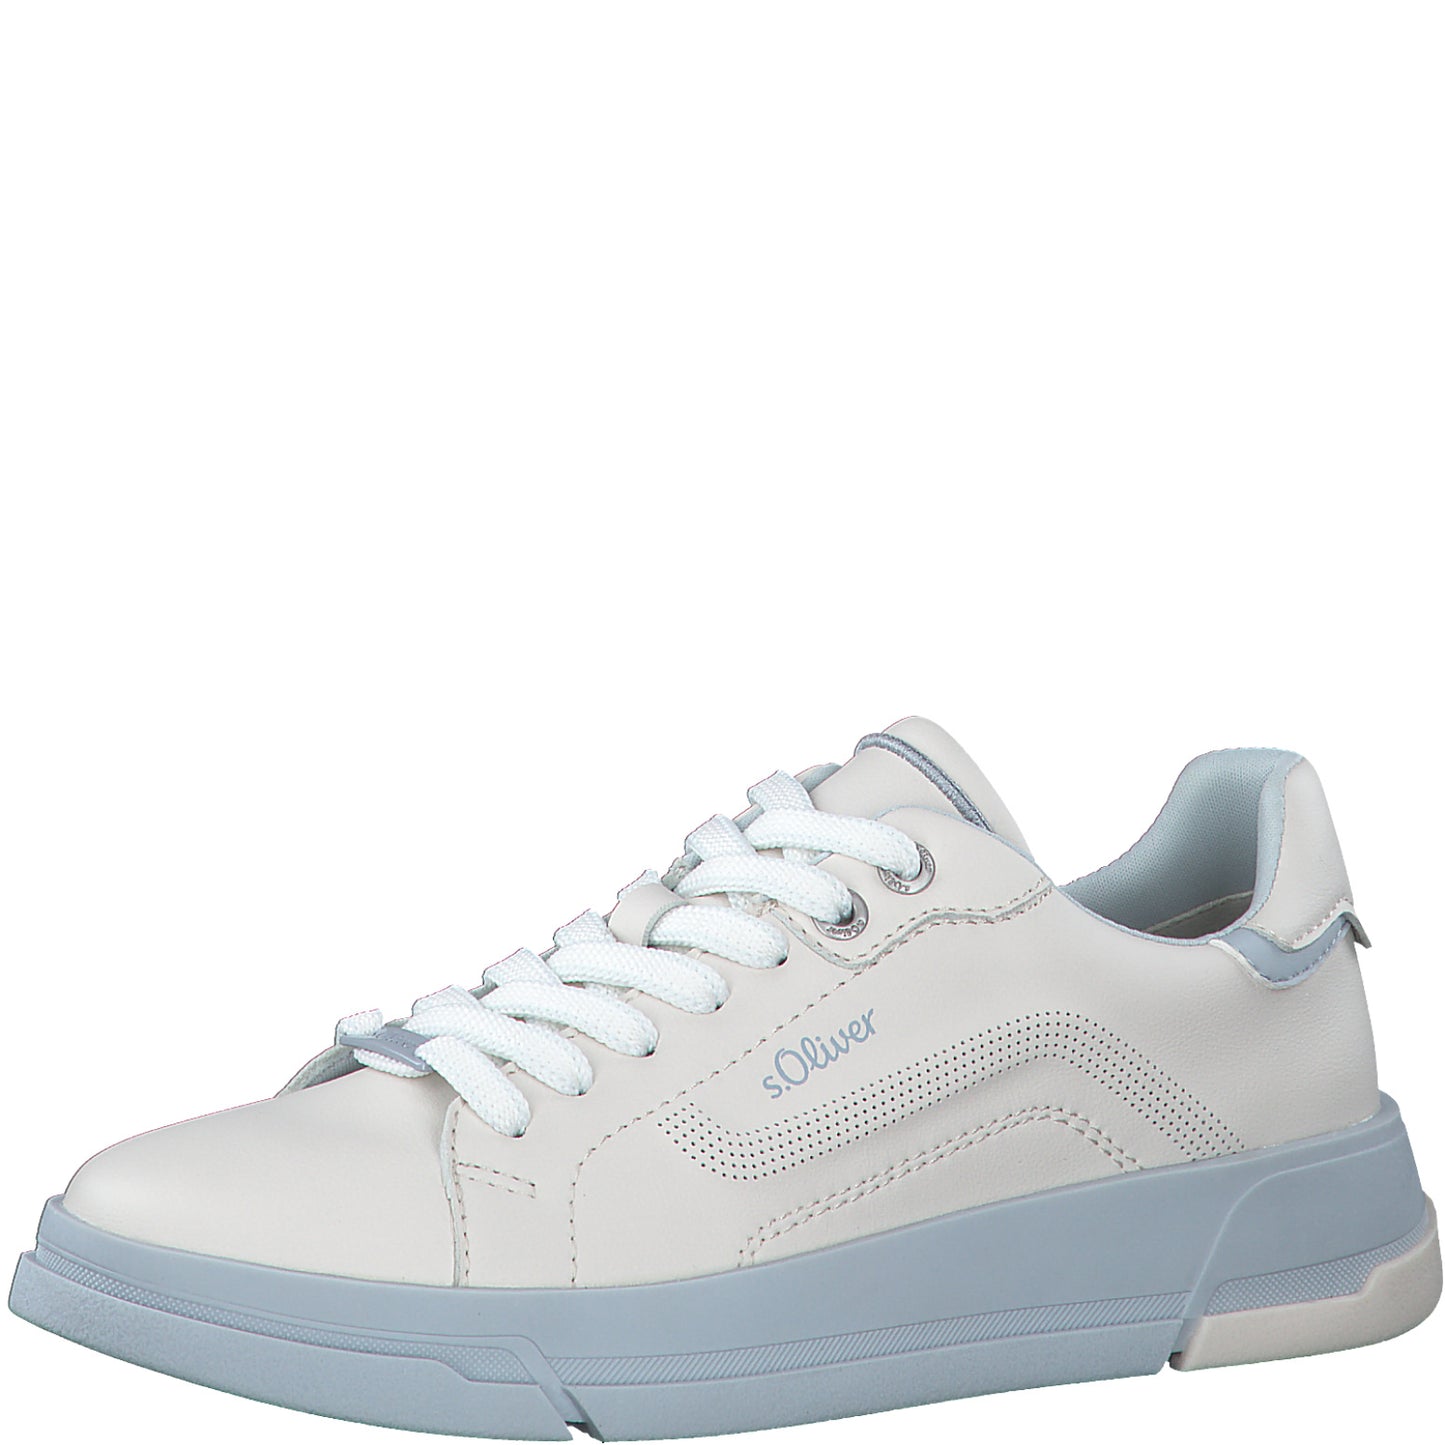 S Oliver 5-5-23626-30 129 White/Blue Trainers